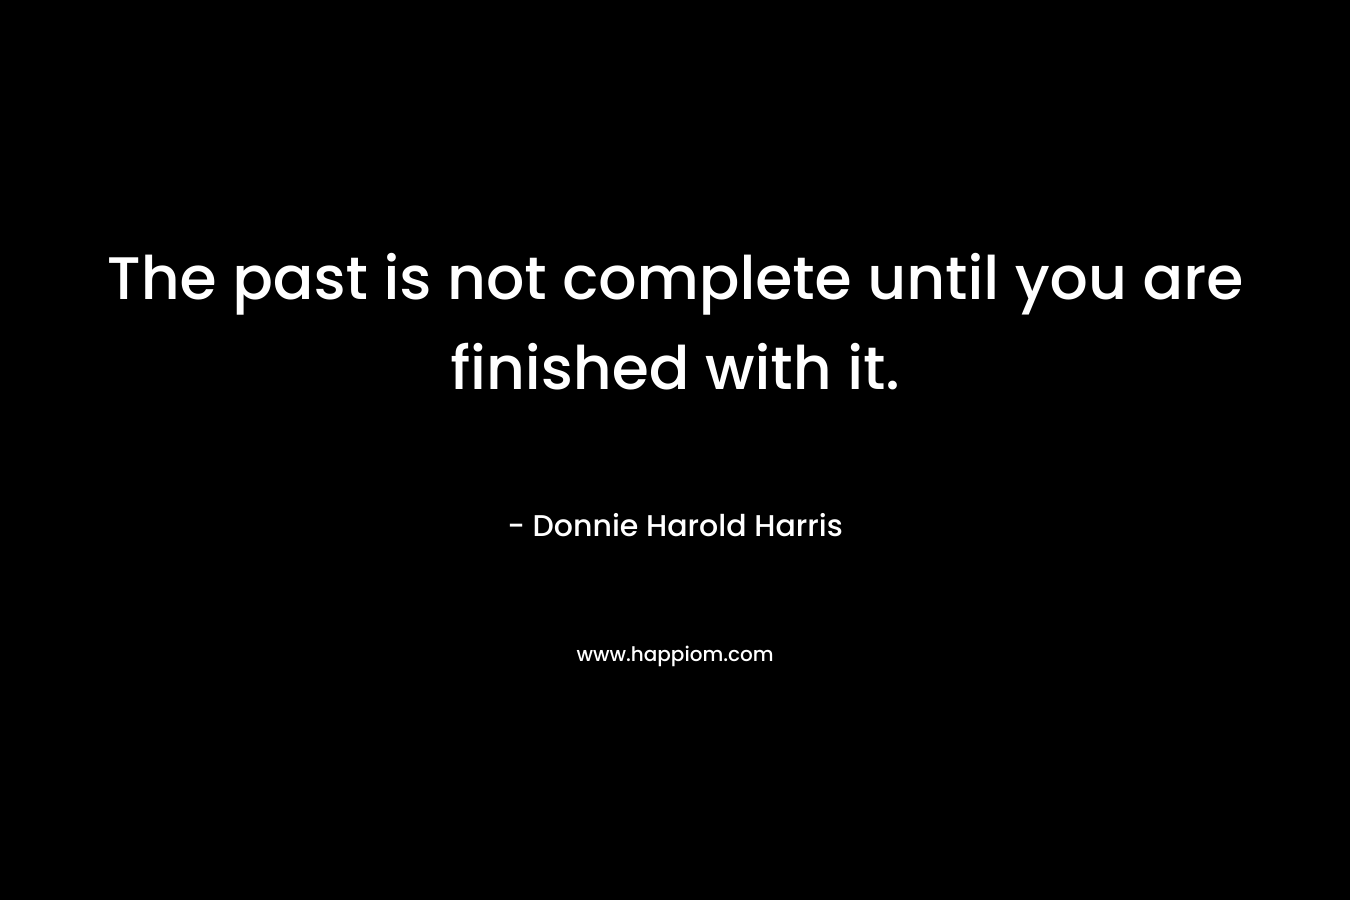 The past is not complete until you are finished with it.